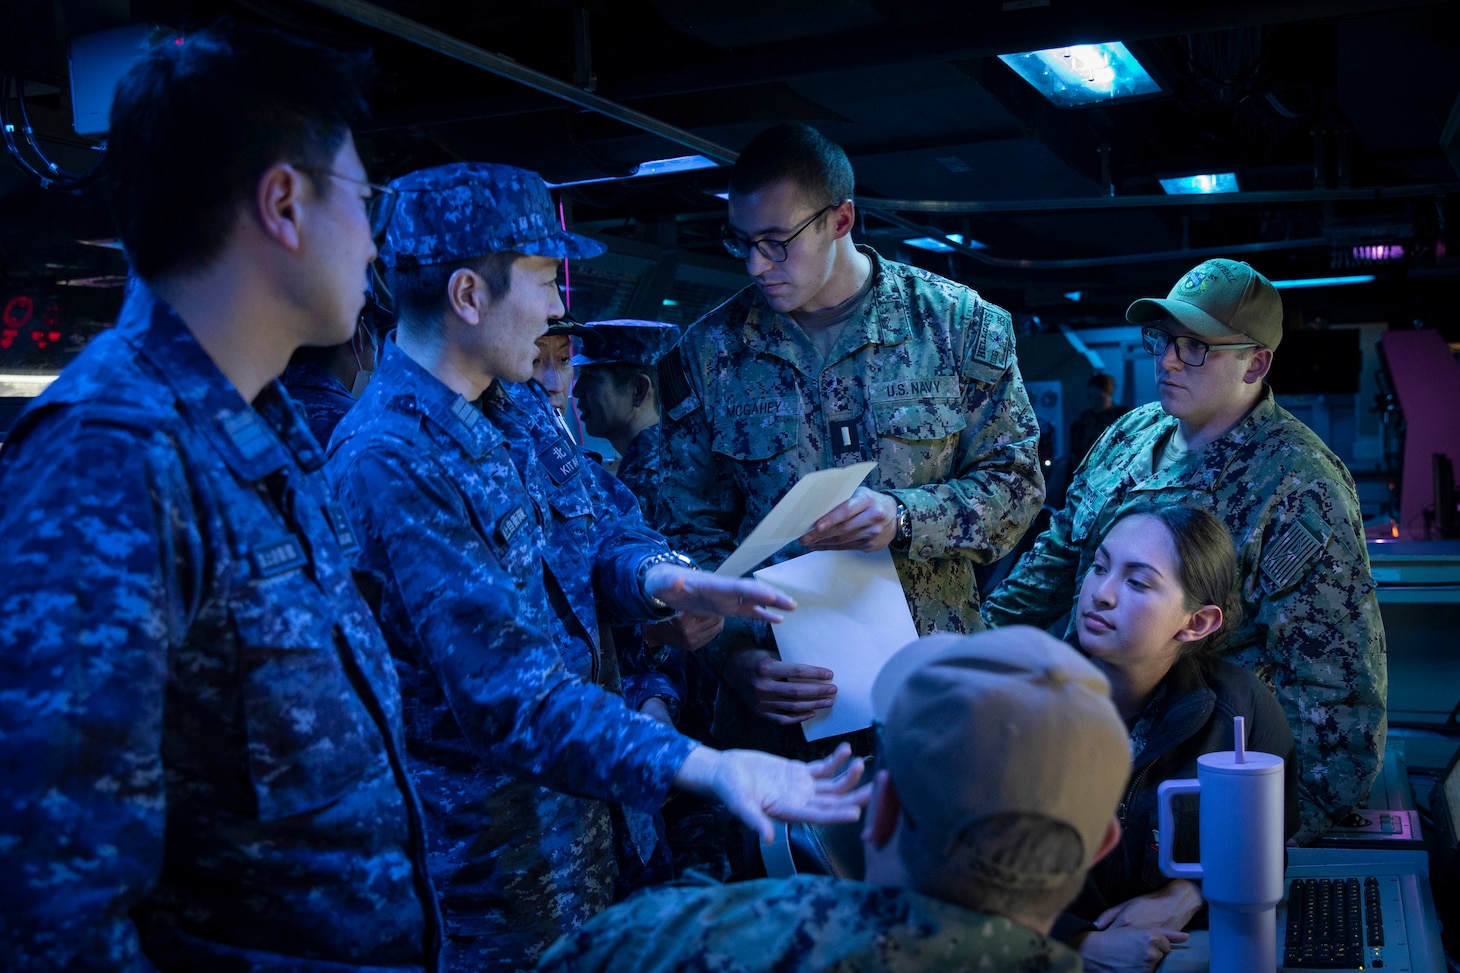 240328-N-SF508-1612 YOKOSUKA, Japan (March 28, 2024) A member of the Japan Maritime Self-Defense Force discusses tomahawk land attack missile (TLAM) procedures with Sailors assigned to the Arleigh Burke-class guided-missile destroyer USS McCampbell (DDG 85), during TLAM training aboard McCampbell at Commander, Fleet Activities Yokosuka, March 28. U.S. 7th Fleet is the U.S. Navy's largest forward-deployed numbered fleet, and routinely interacts and operates with allies and partners in preserving a free and open Indo-Pacific region. (U.S. Navy Photo by Mass Communication Specialist 1st Class Charles Oki)